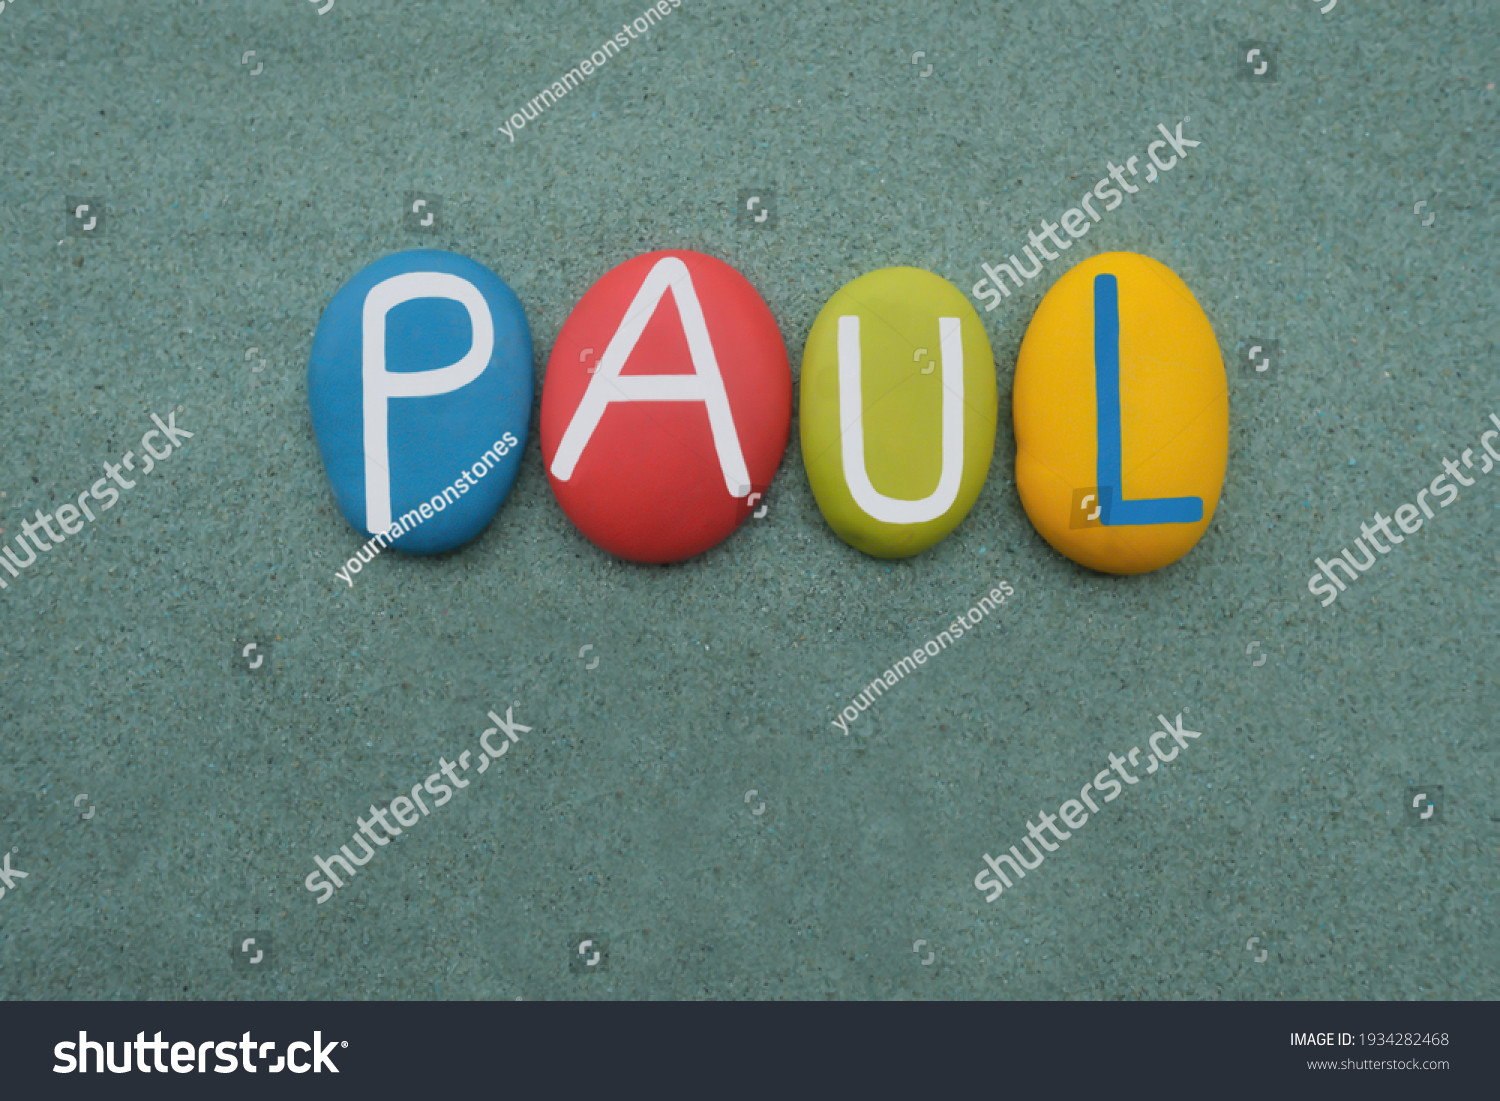 Paul, male given name composed with multi colored stone letters over green sand #1934282468